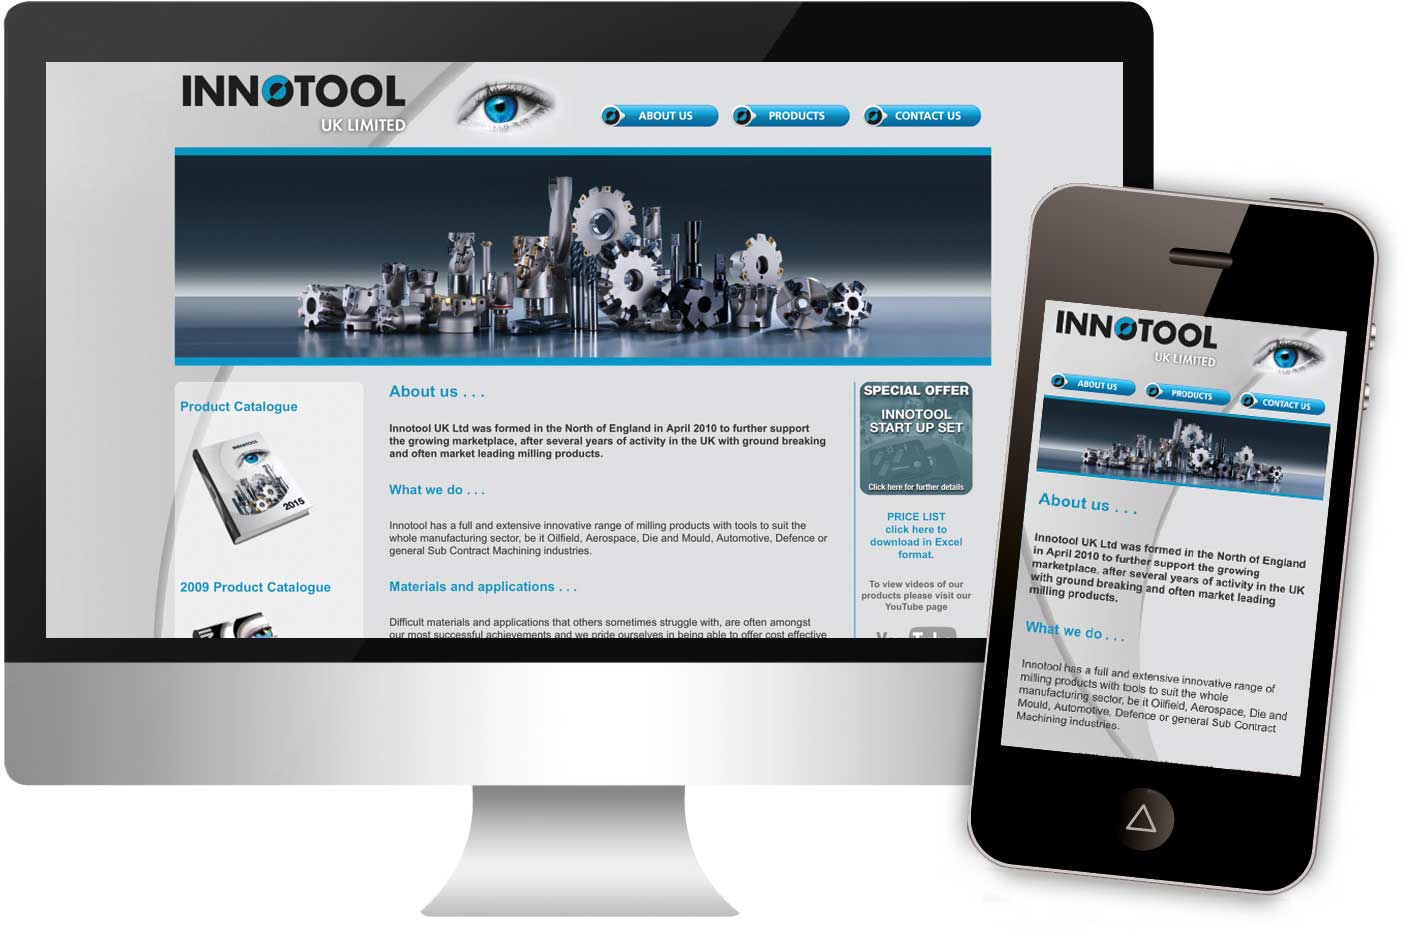 Innotool Uk Limited website, launched in January 2016, responsive web design.